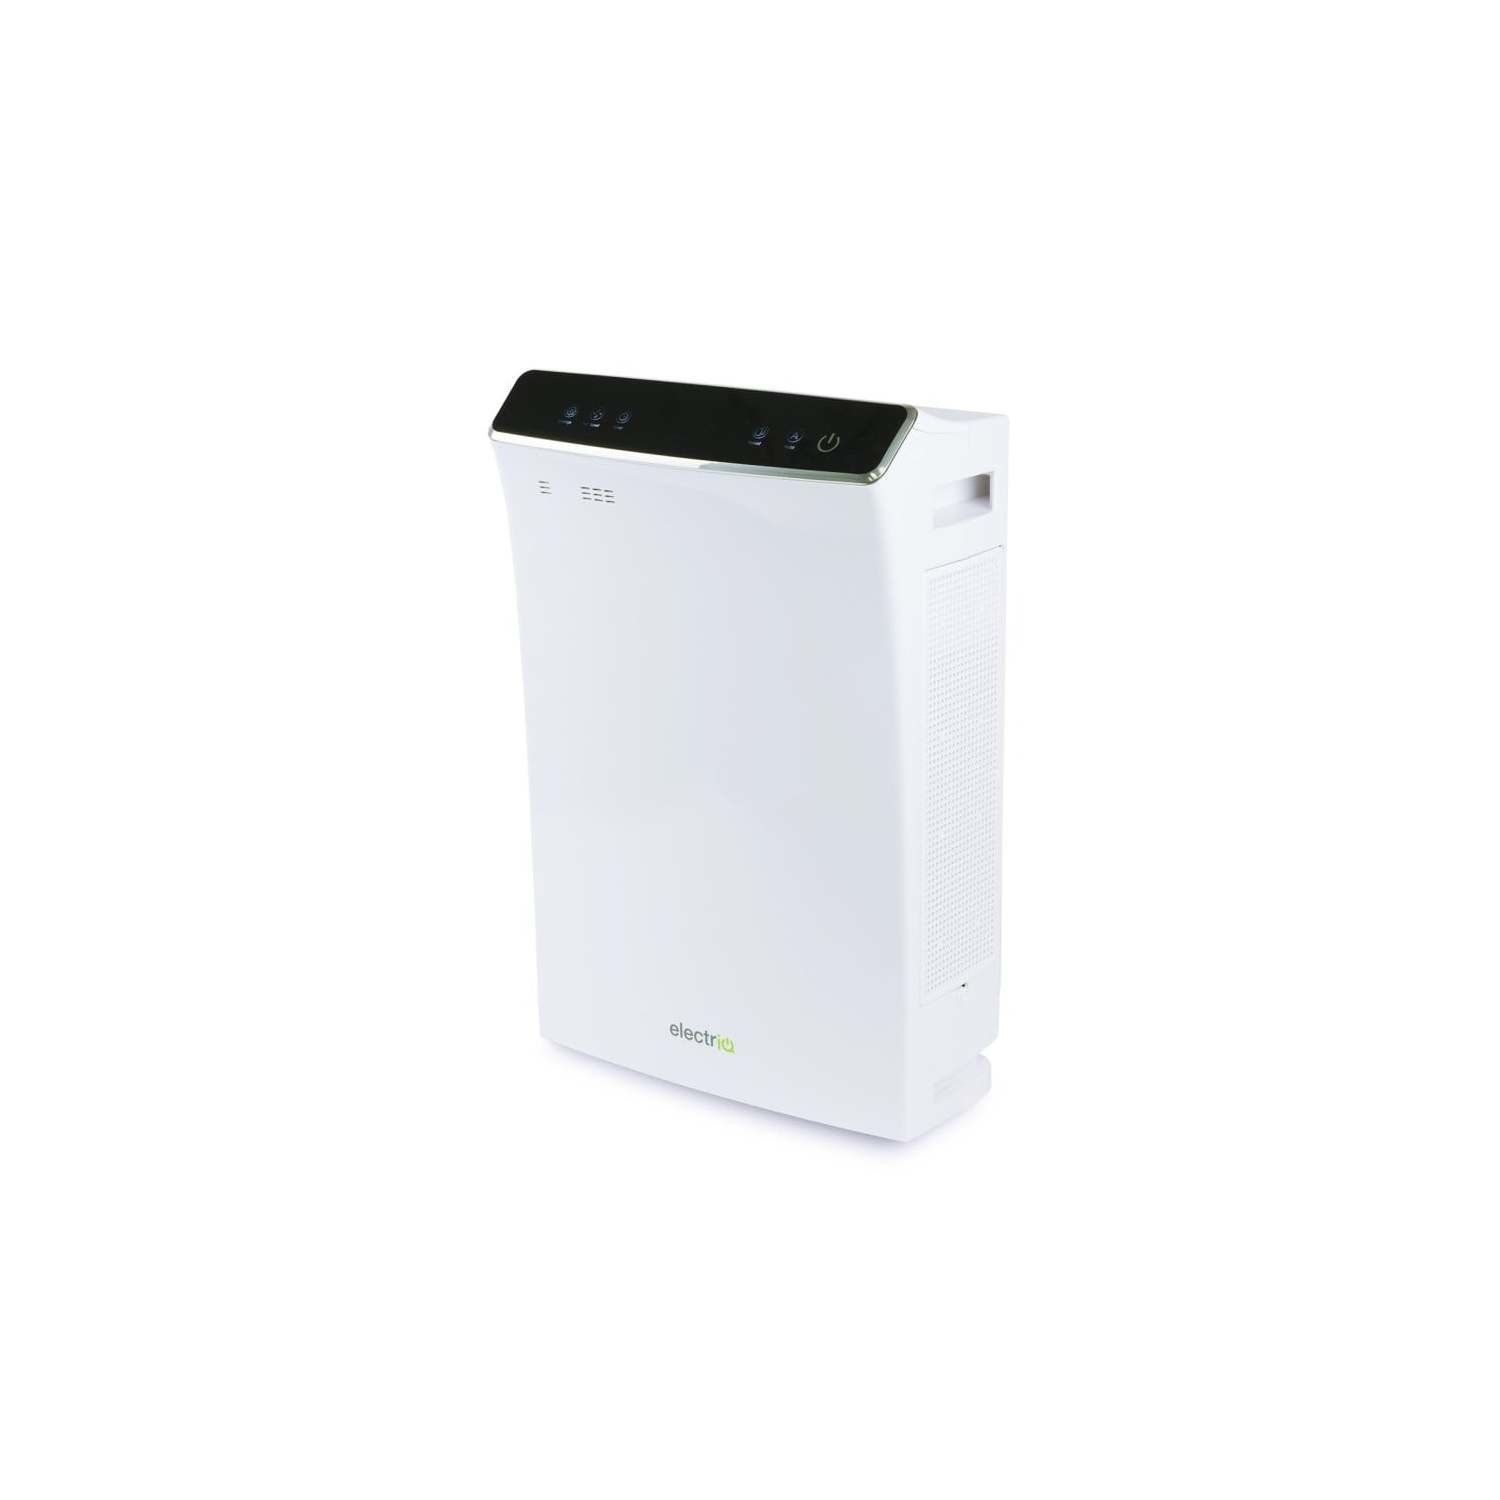 Refurbished electriQ 5 Stage Antiviral Air Purifier with Smart WiFi PM2.5 UV True HEPA and Carbon Fi